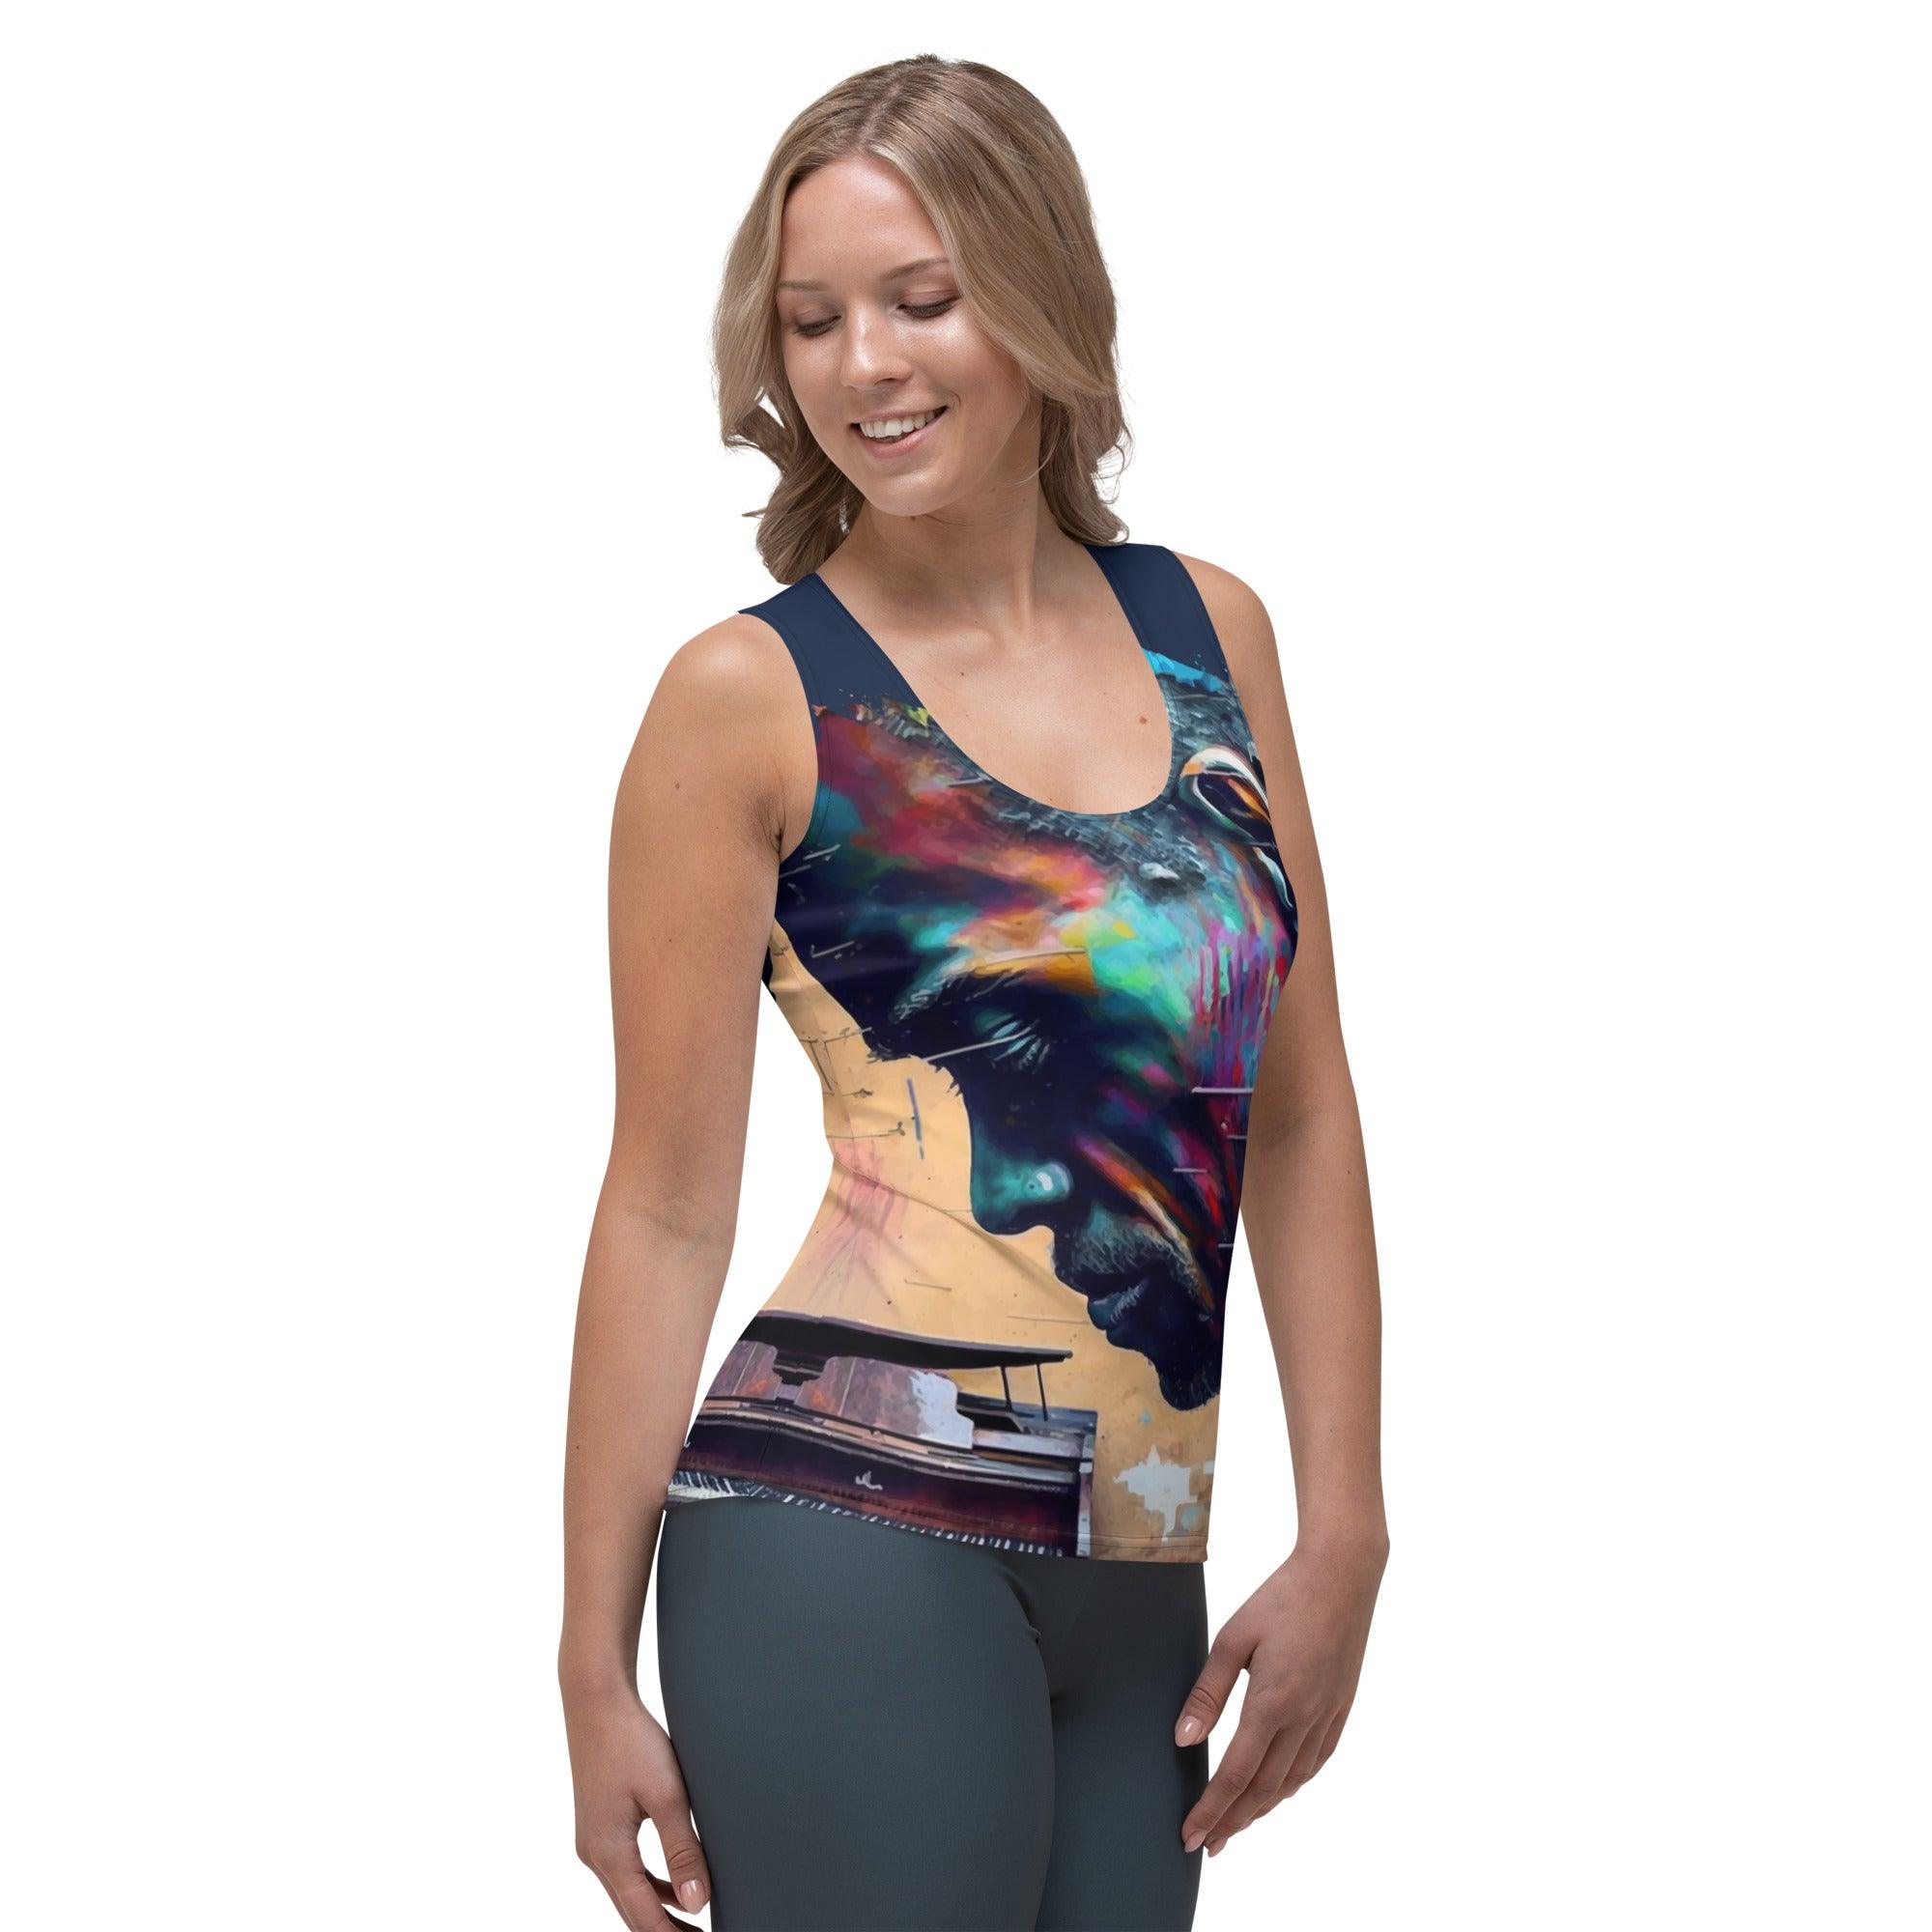 Groovin' On The Keys Sublimation Cut & Sew Tank Top - Beyond T-shirts